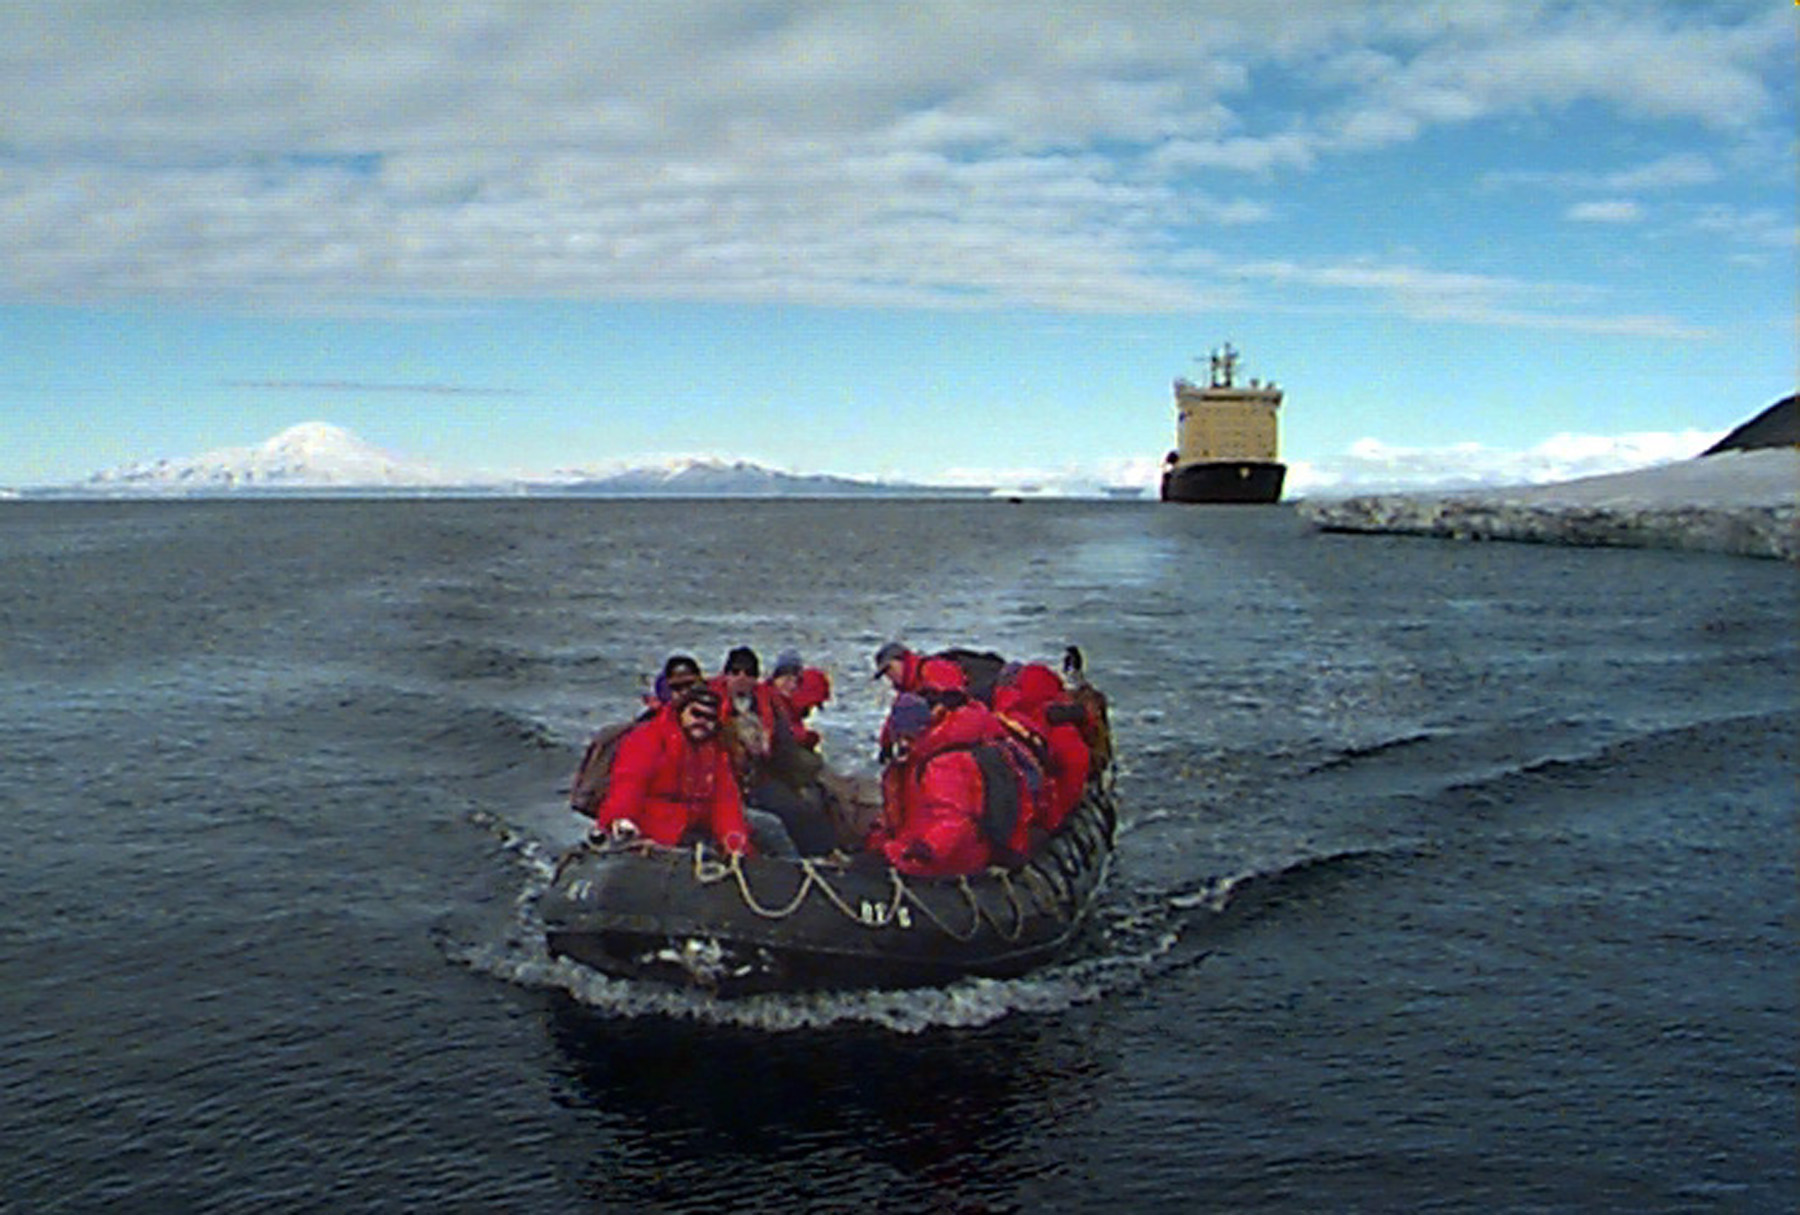 A group of people ride  in a rubber raft with a ship in the distance.